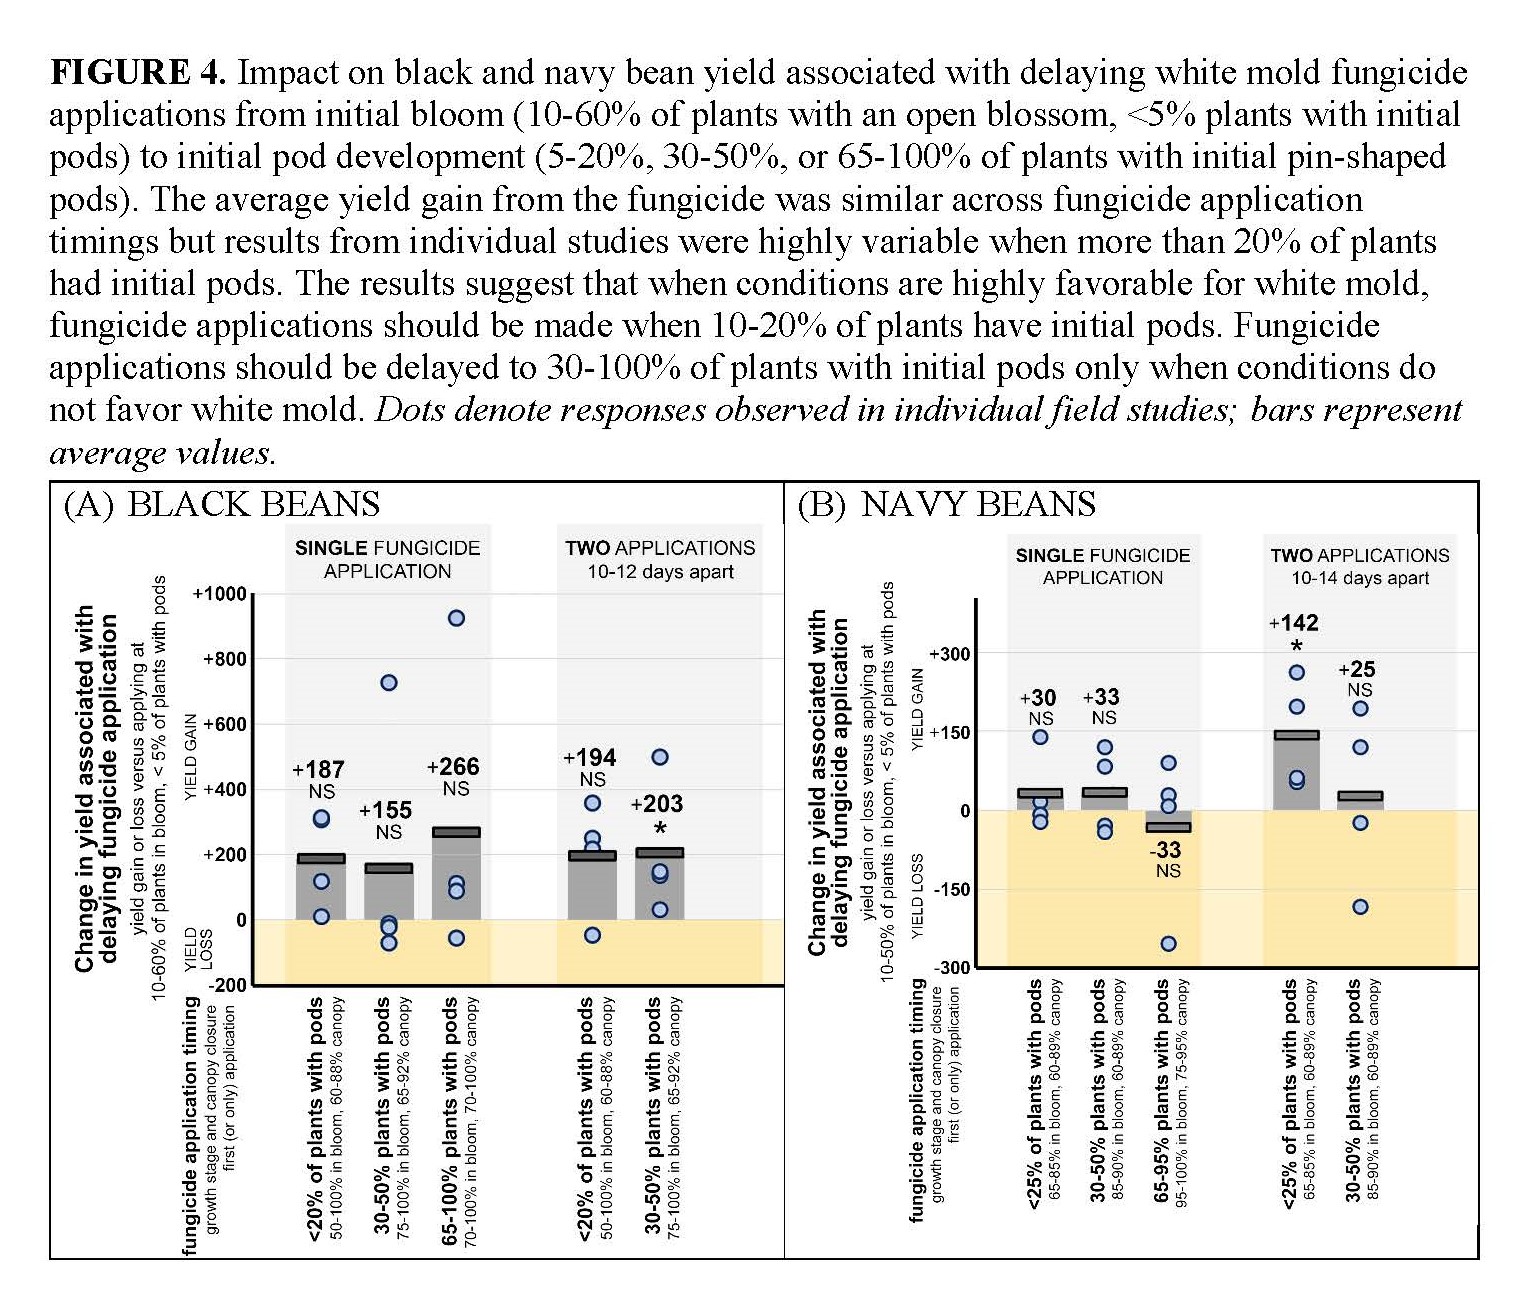 Impact on black and navy bean yield associated with delaying white mold fungicide applications from initial bloom (10-60% of plants with an open blossom, <5% plants with initial pods) to initial pod development (5-20%, 30-50%, or 65-100% of plants with initial pin-shaped pods). 